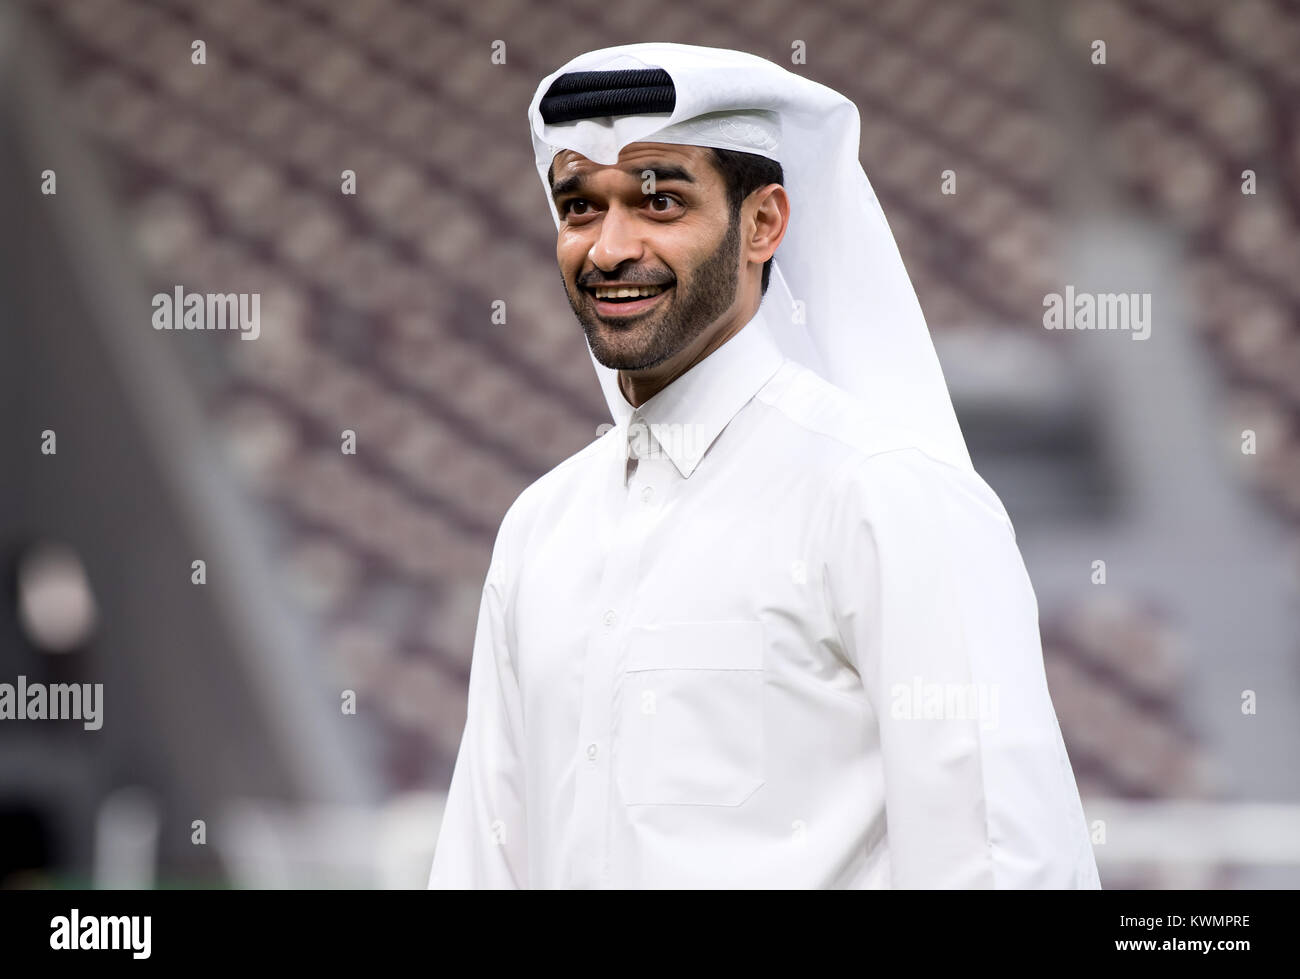 Doha, Qatar. 4th Jan, 2018. The general secretary of the World Cup's organisation committee Hassan Al-Thawadi is participating in a press conference in the Khalifa International Stadium in Doha, Qatar, 4 January 2018. The final round of the Soccer World Cup will be held in Qatar in 2022. Credit: Sven Hoppe/dpa/Alamy Live News Stock Photo